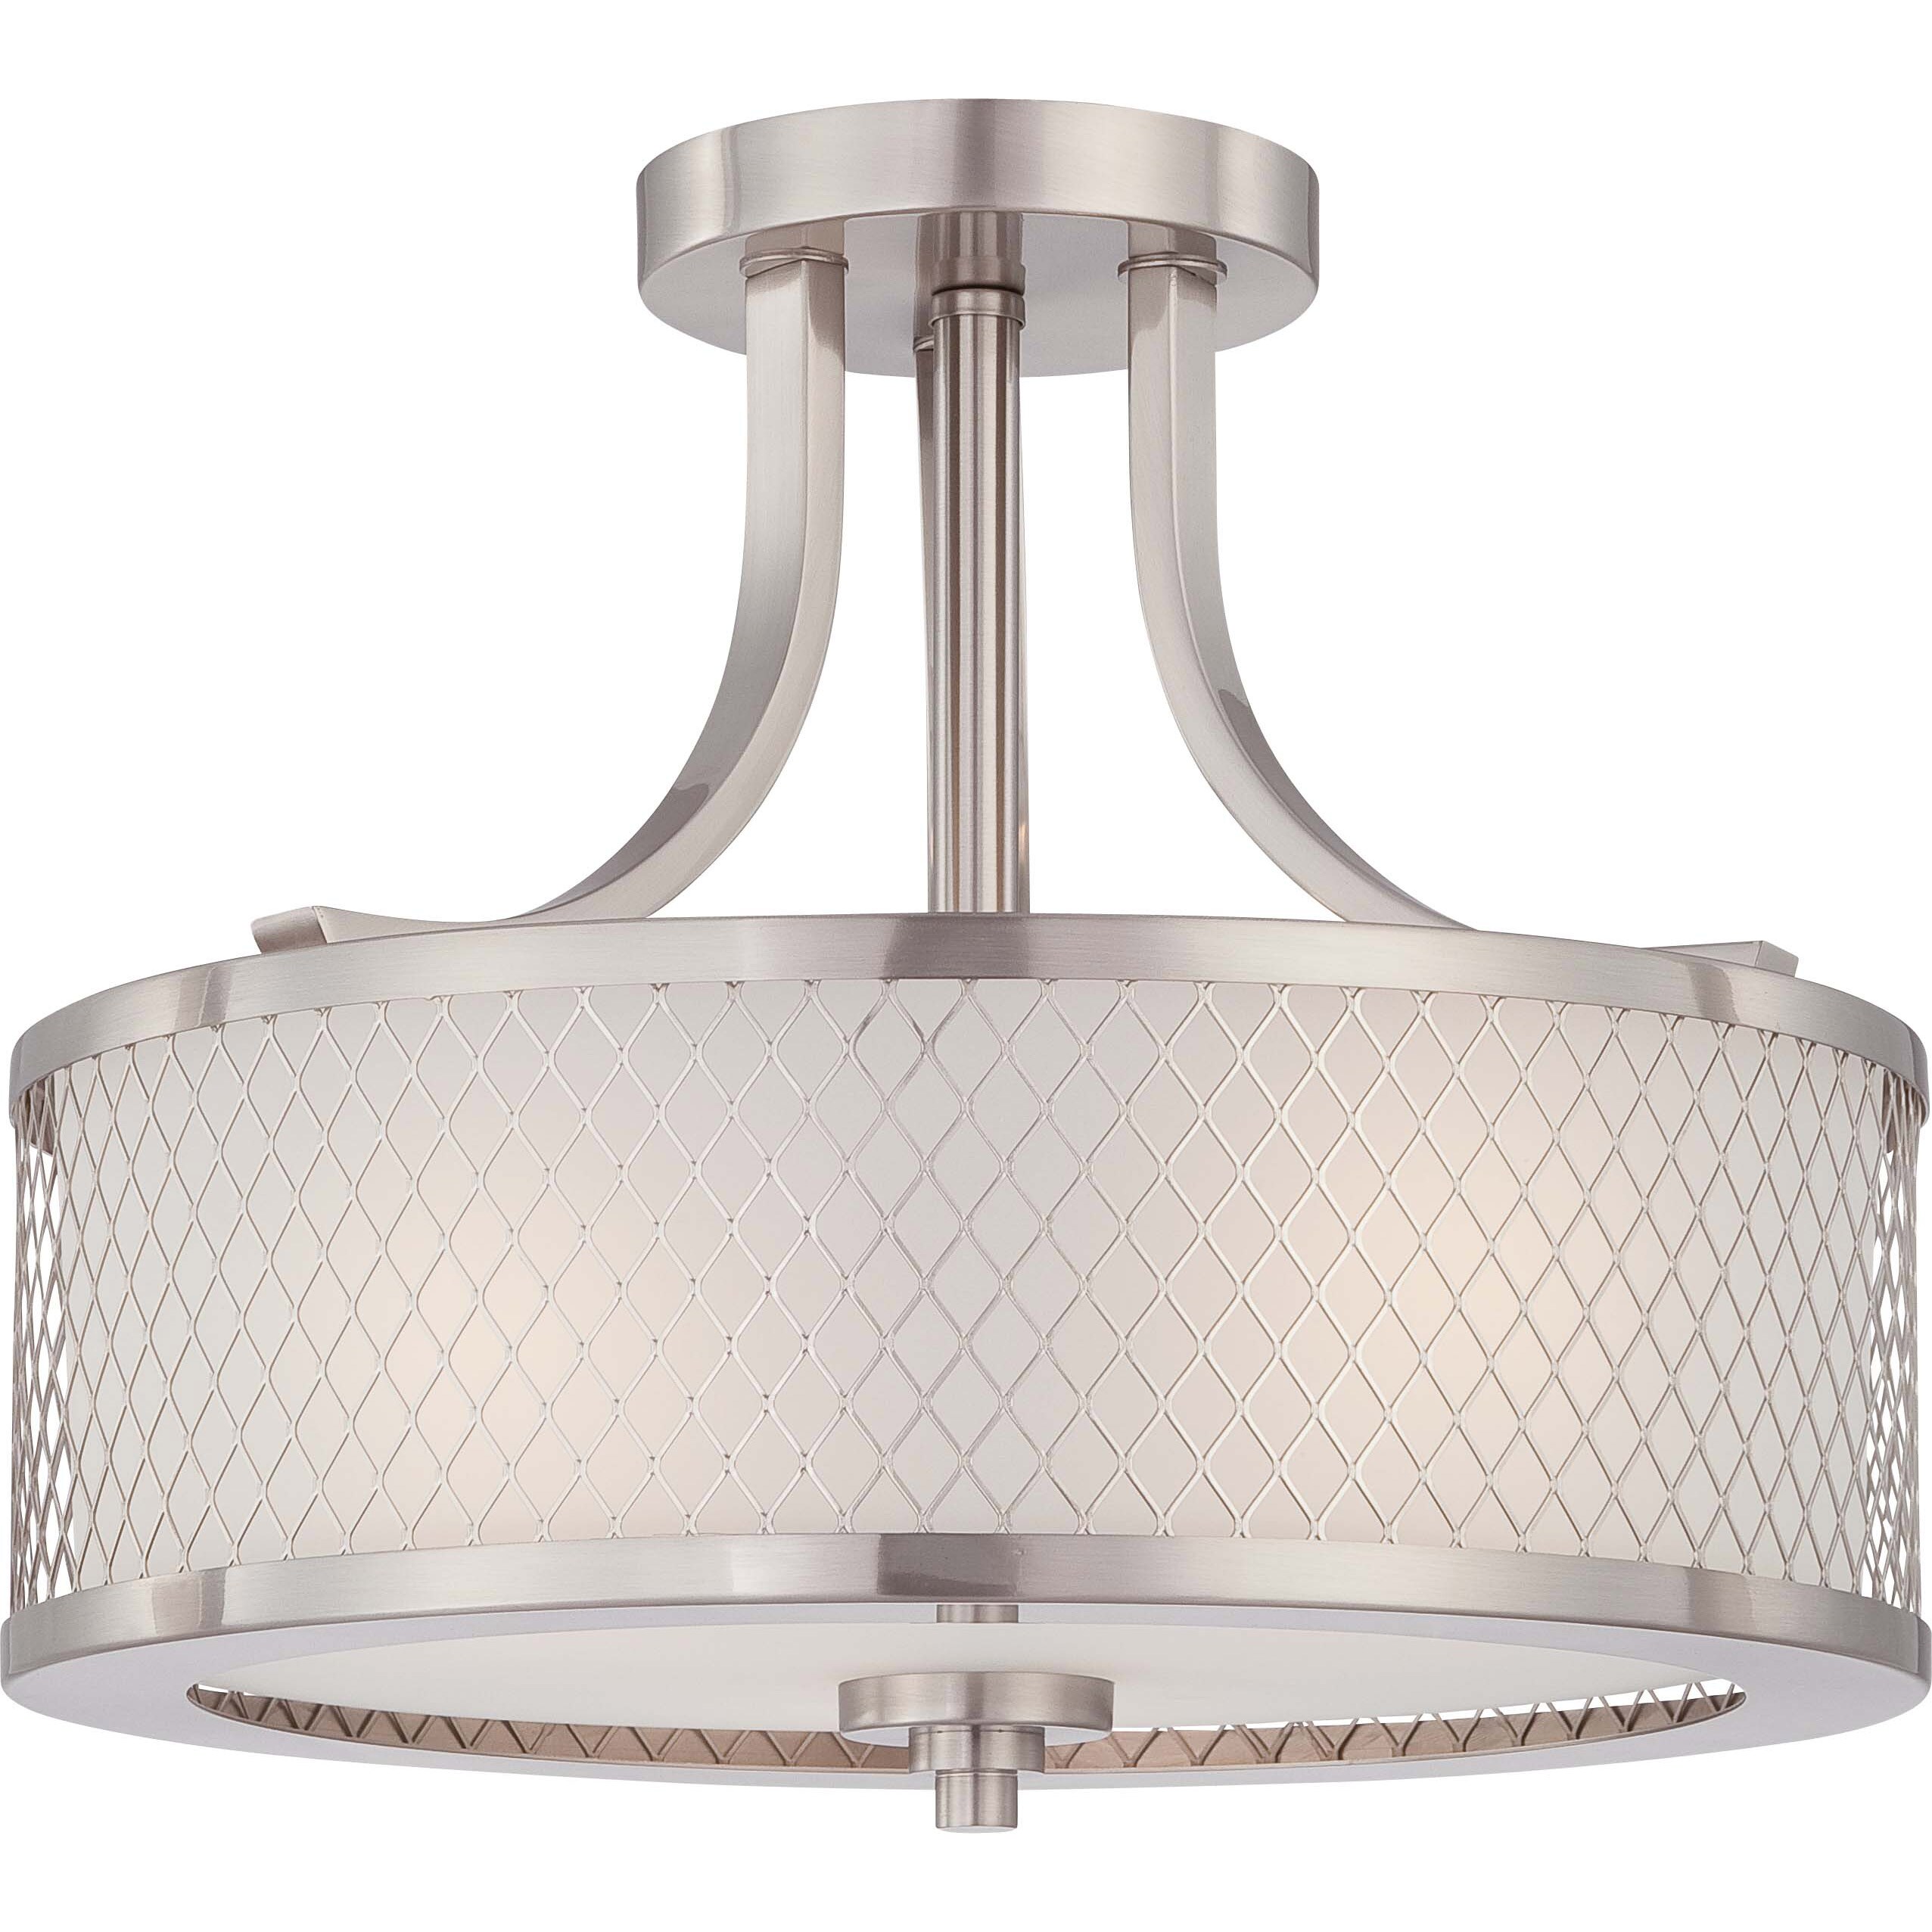 Fusion Nickel And Frosted Glass 3 light Semi Flush Fixture